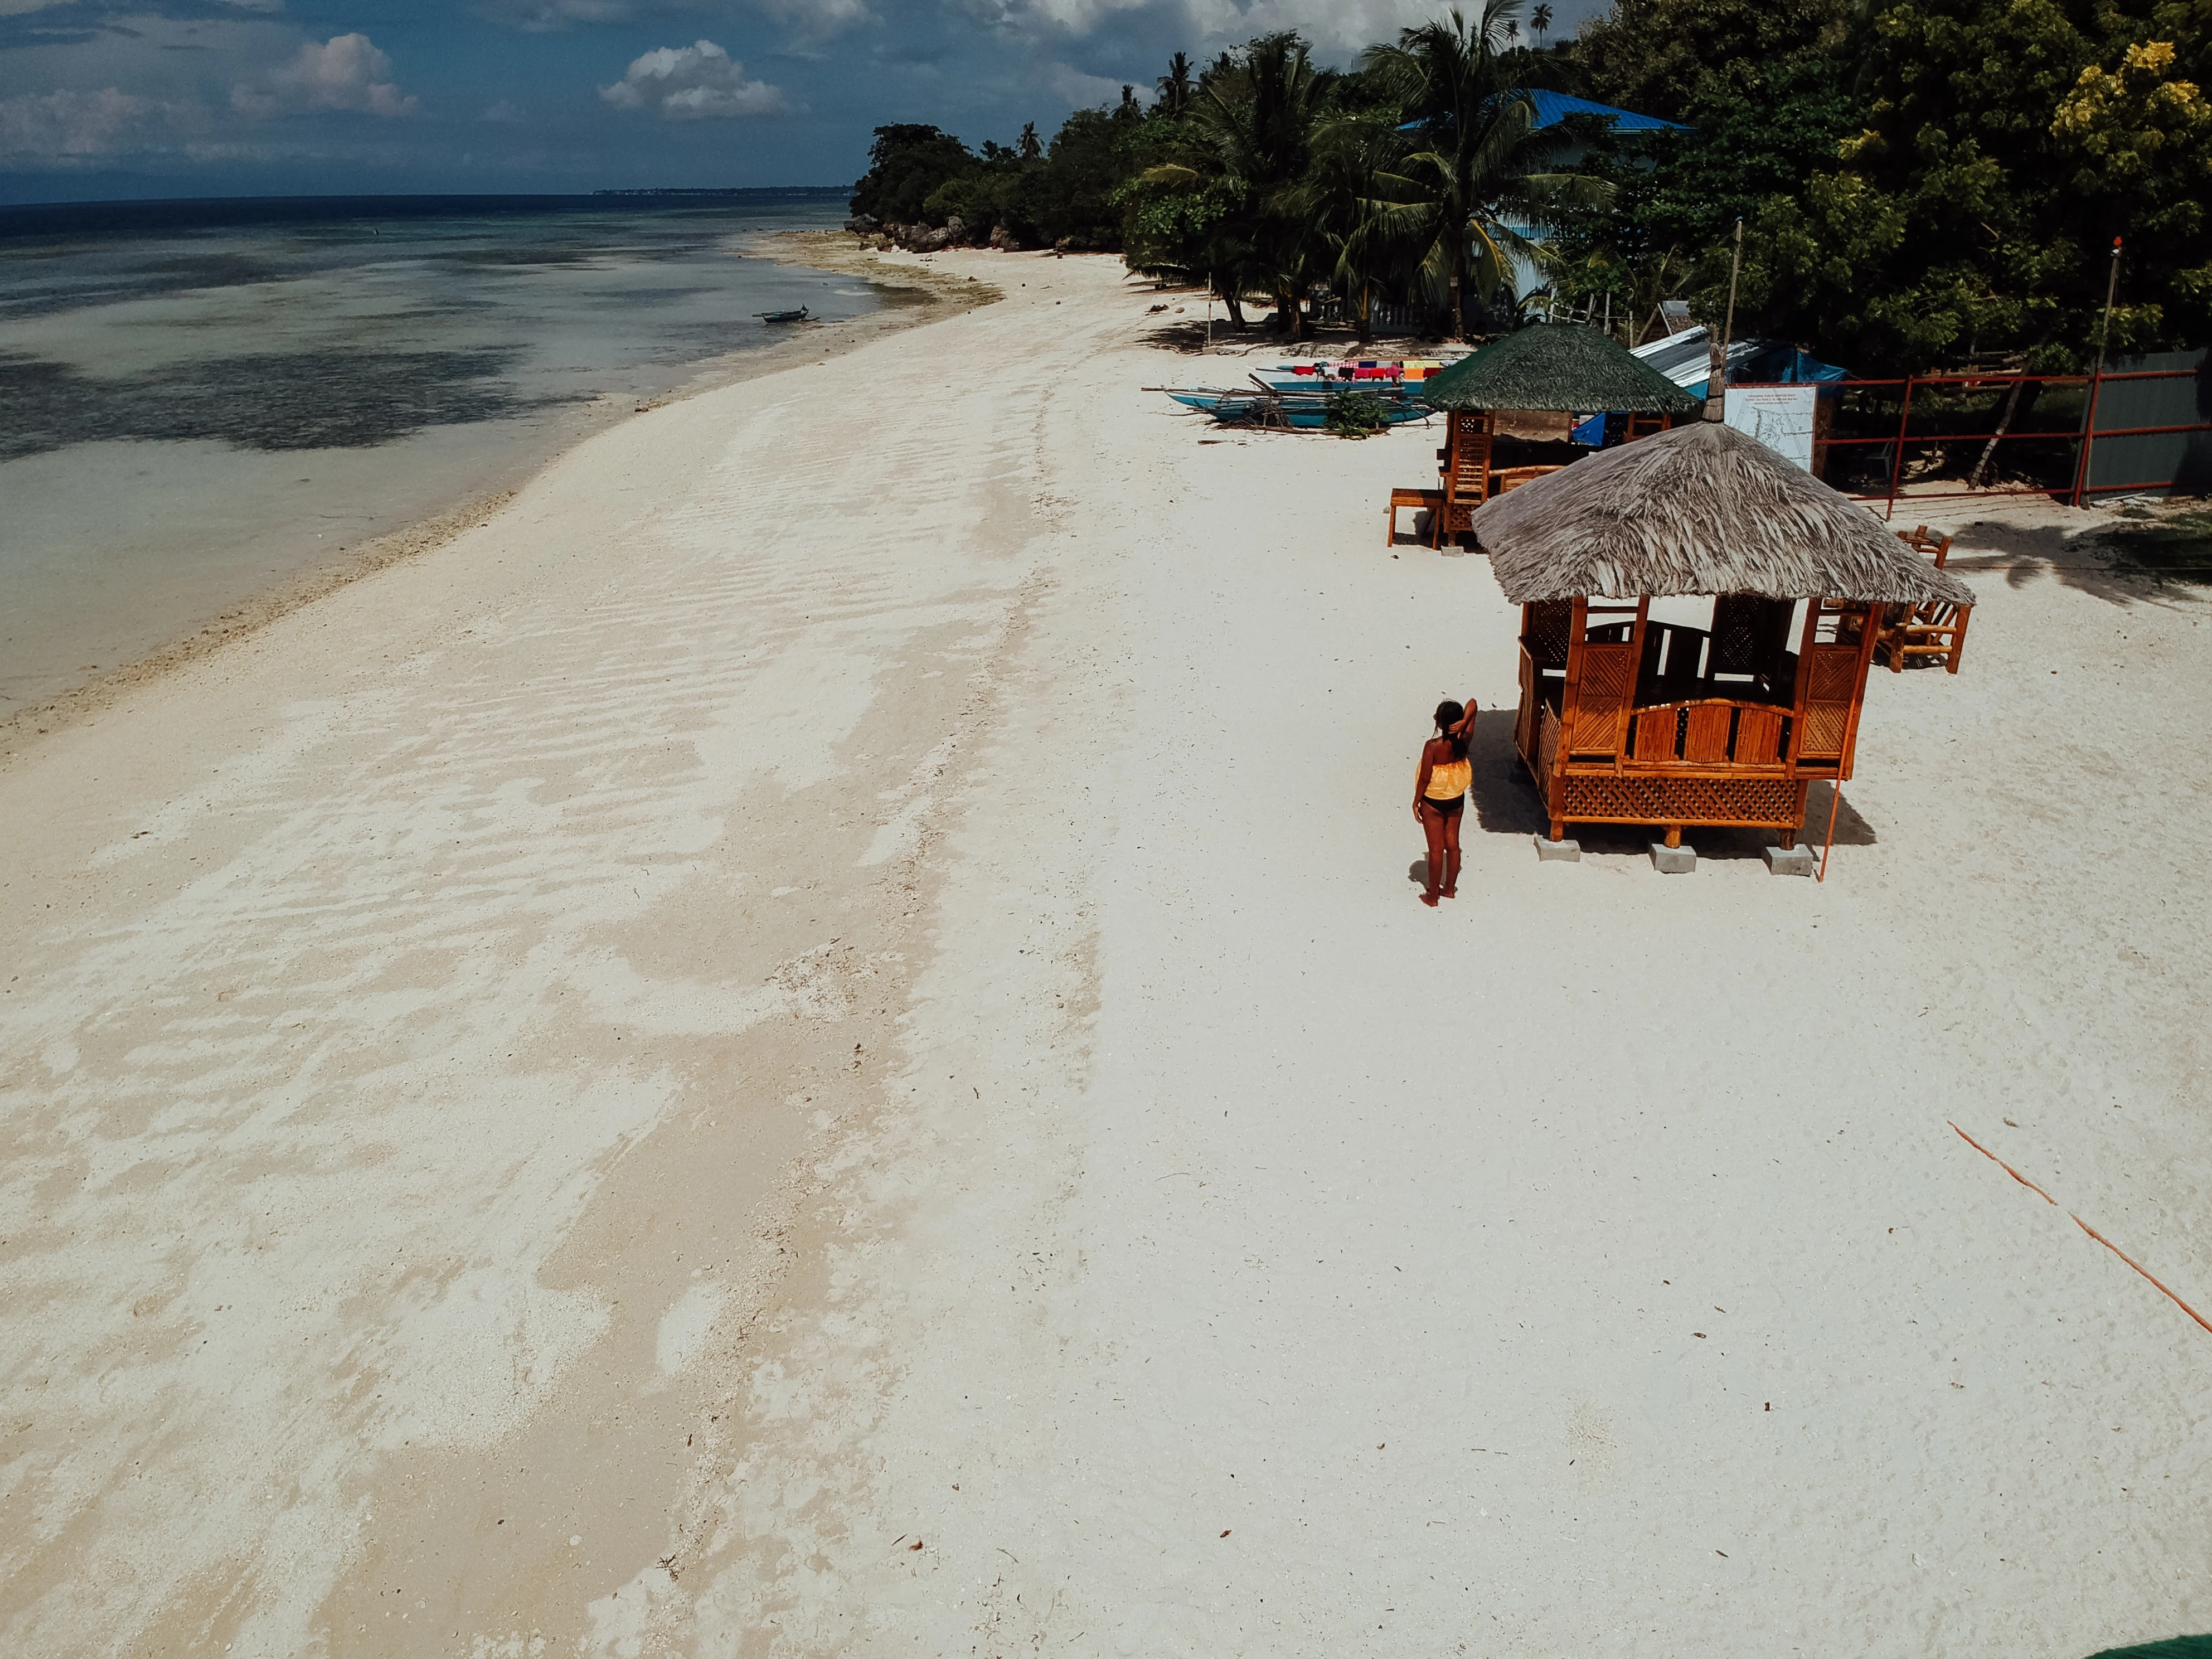 things to do in moalboal, what to do in moalboal at night, moalboal cebu itinerary, moalboal philippines, where to stay in moalboal,moalboal tourism,basdaku moalboal,things to see in moalboal cebu, pescadores island, Lambug Beach